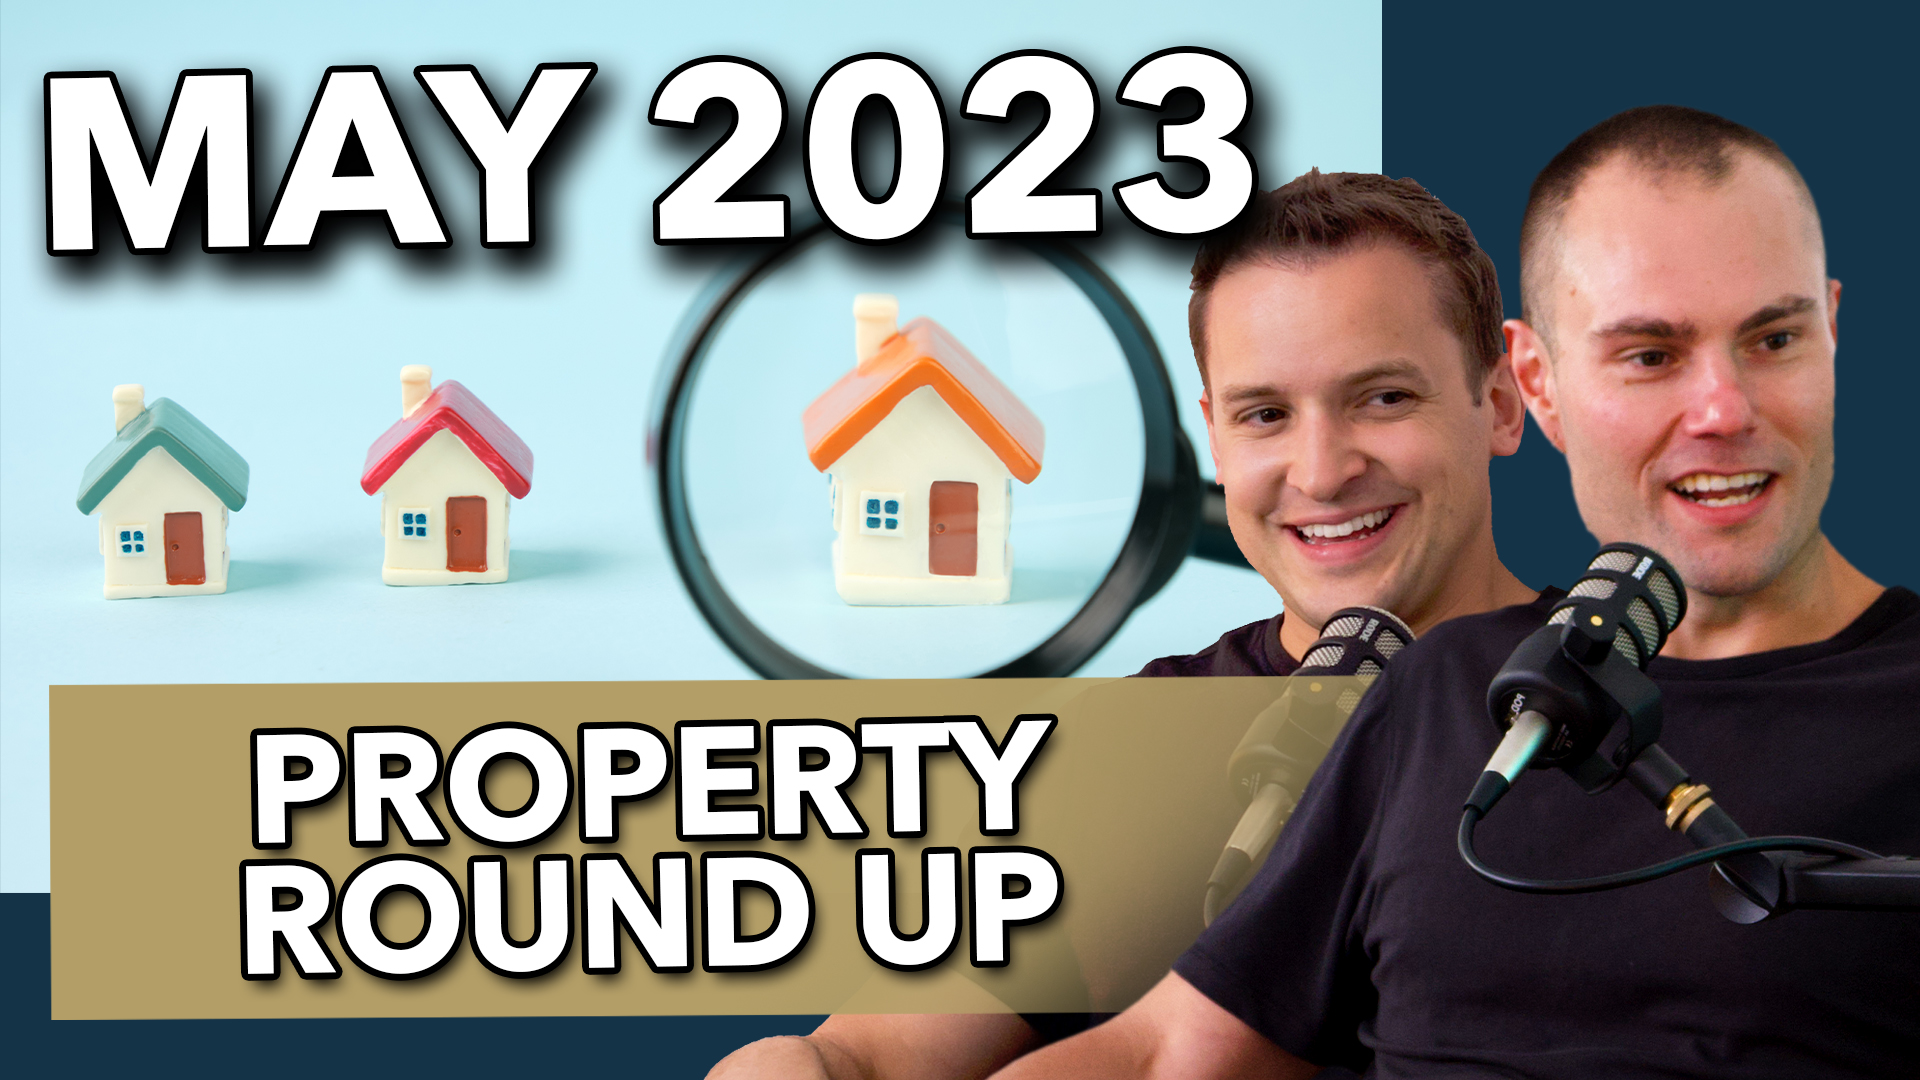 May 2023 Property Round Up